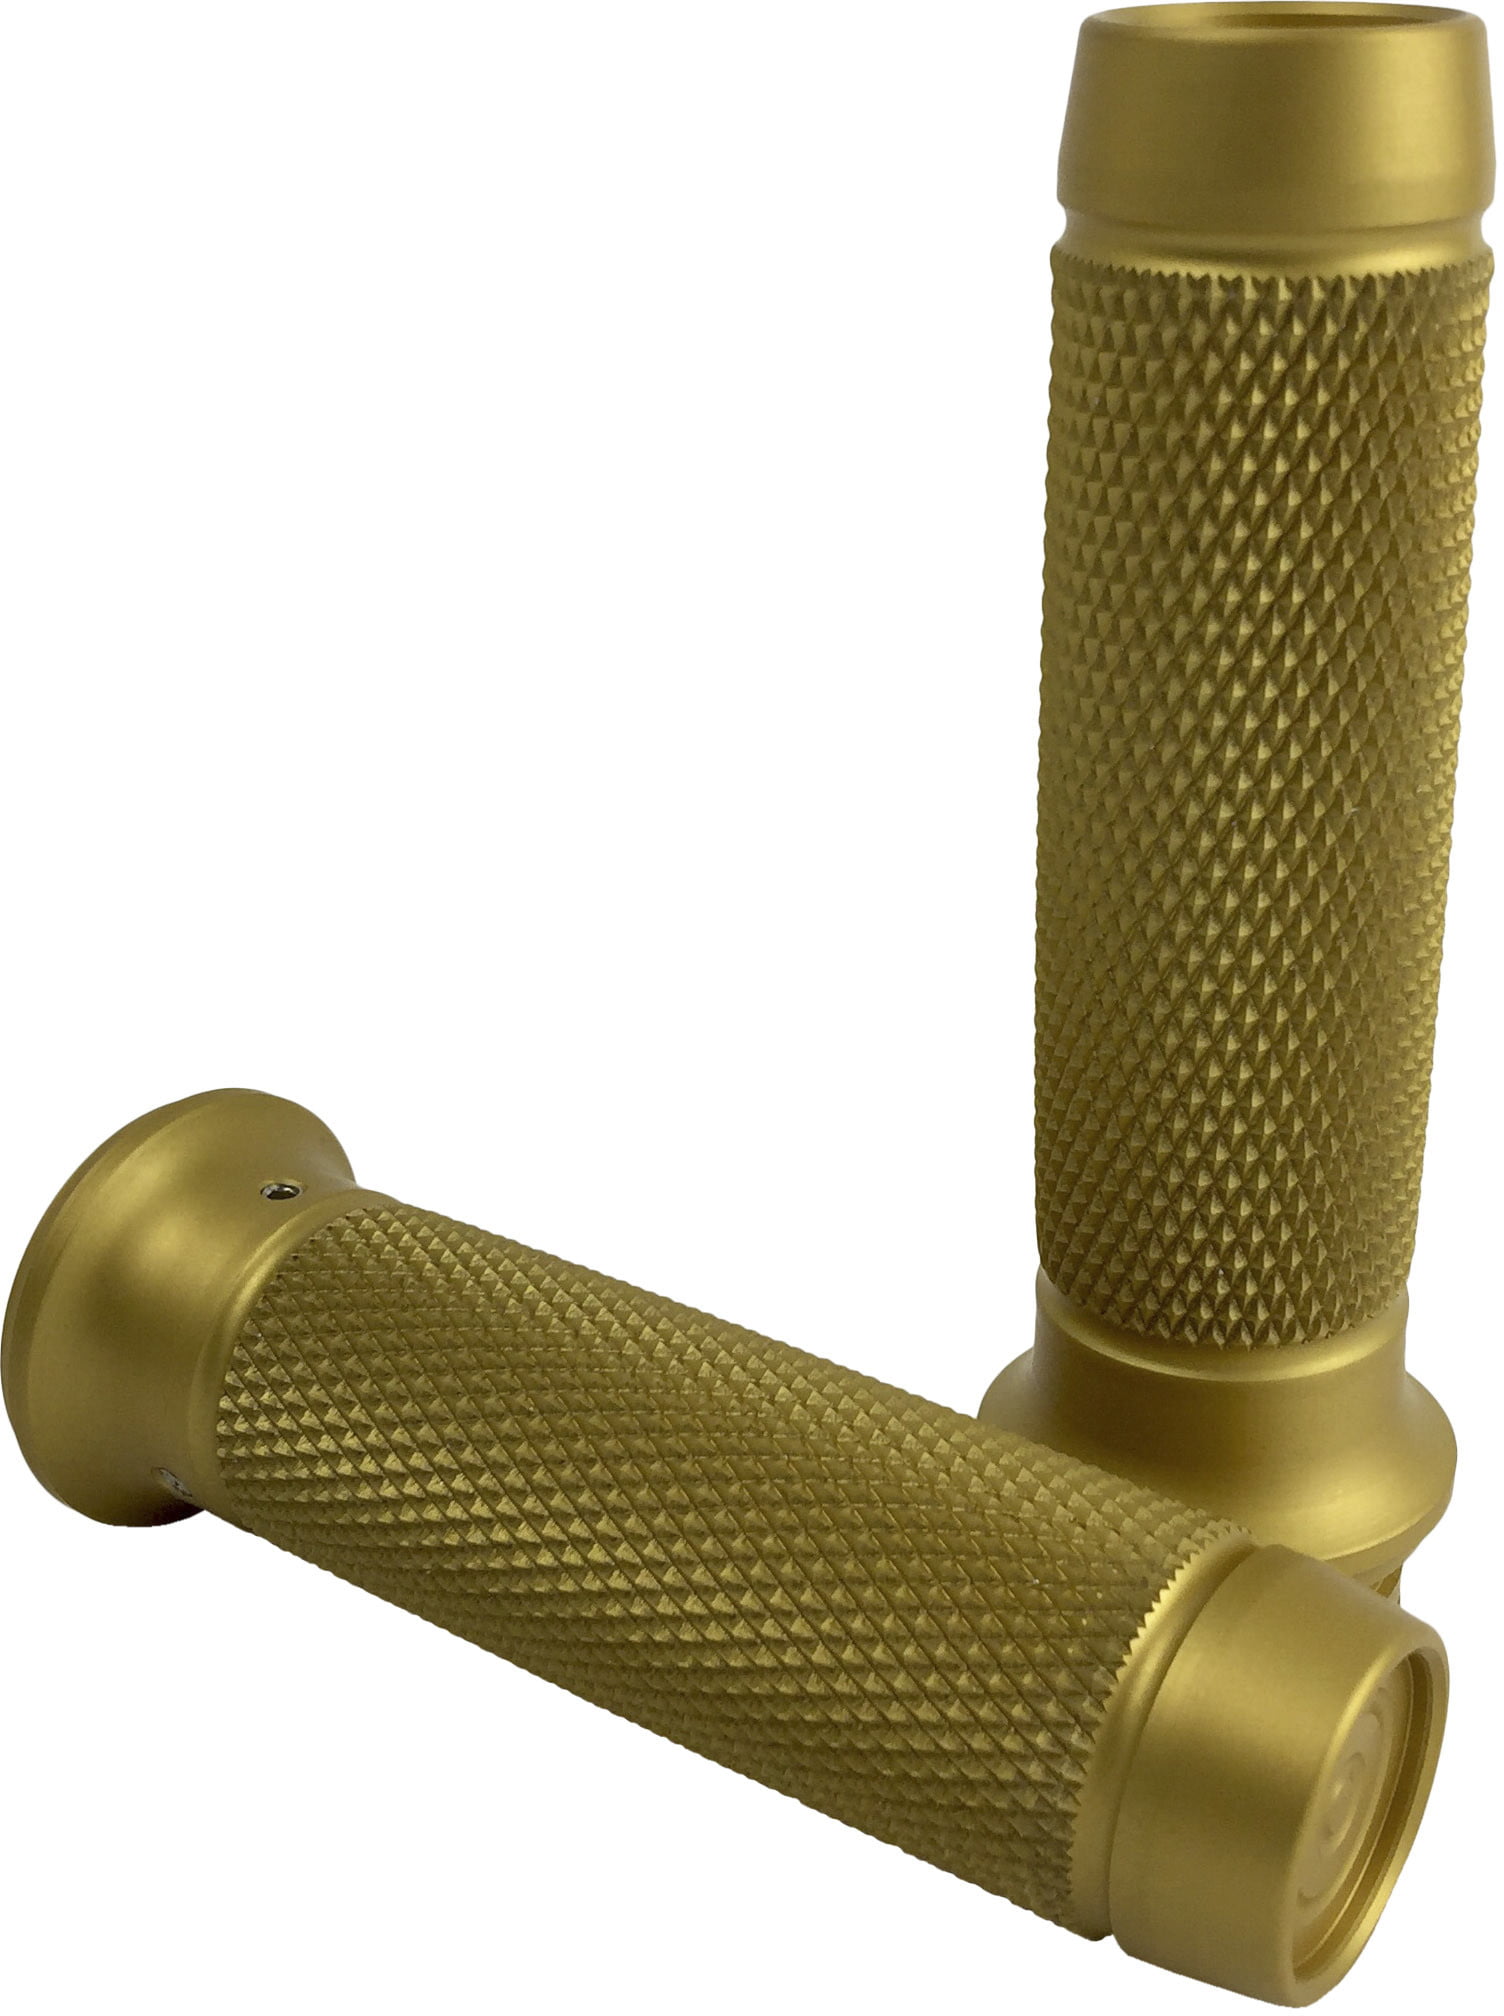 New Brass balls cycles moto knurled grips universal for TBW Harleys bb08-260